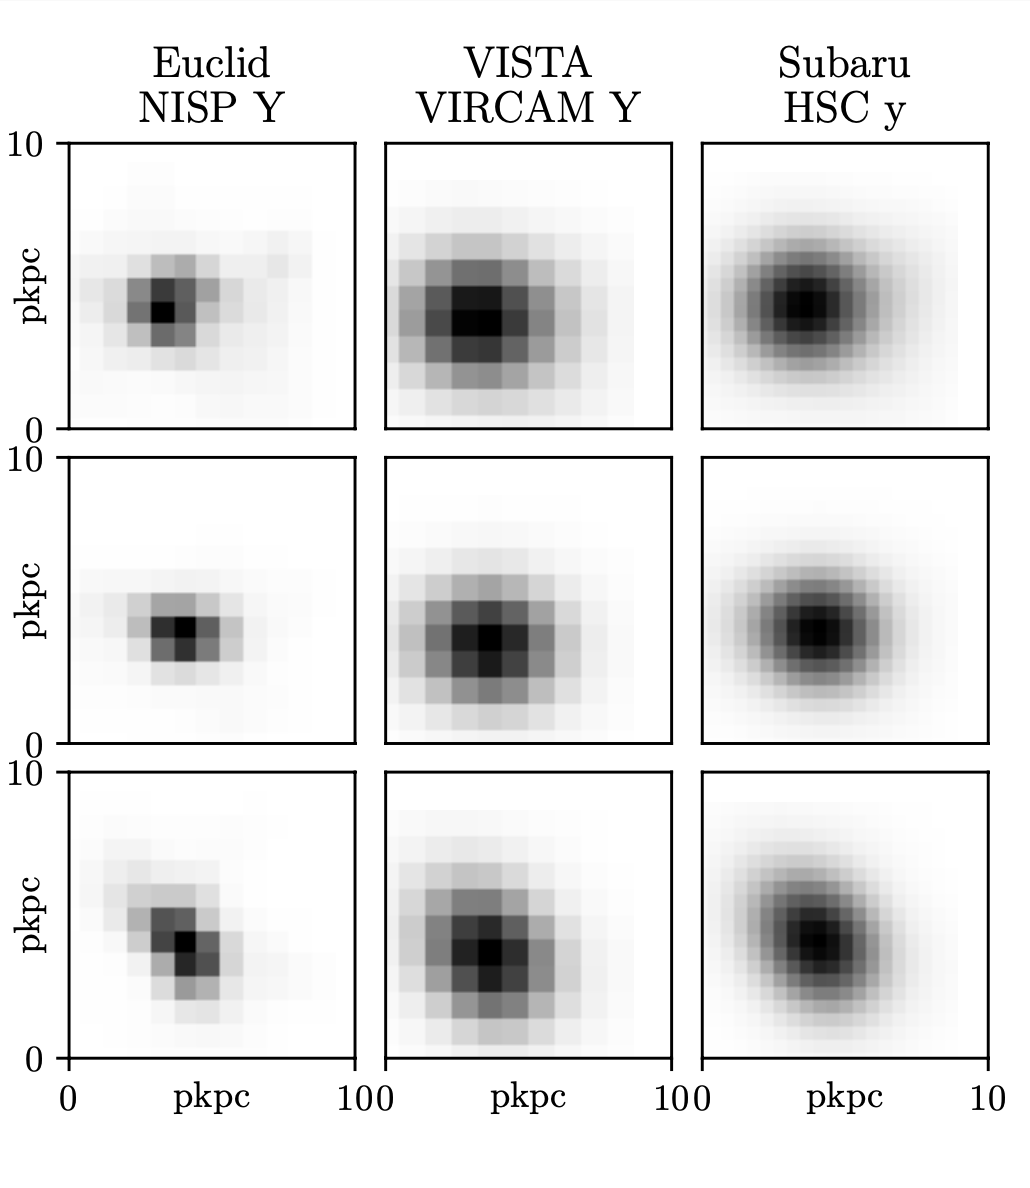 Simulated z=7 galaxies from BlueTides in Euclid, VISTA and Subaru filters.